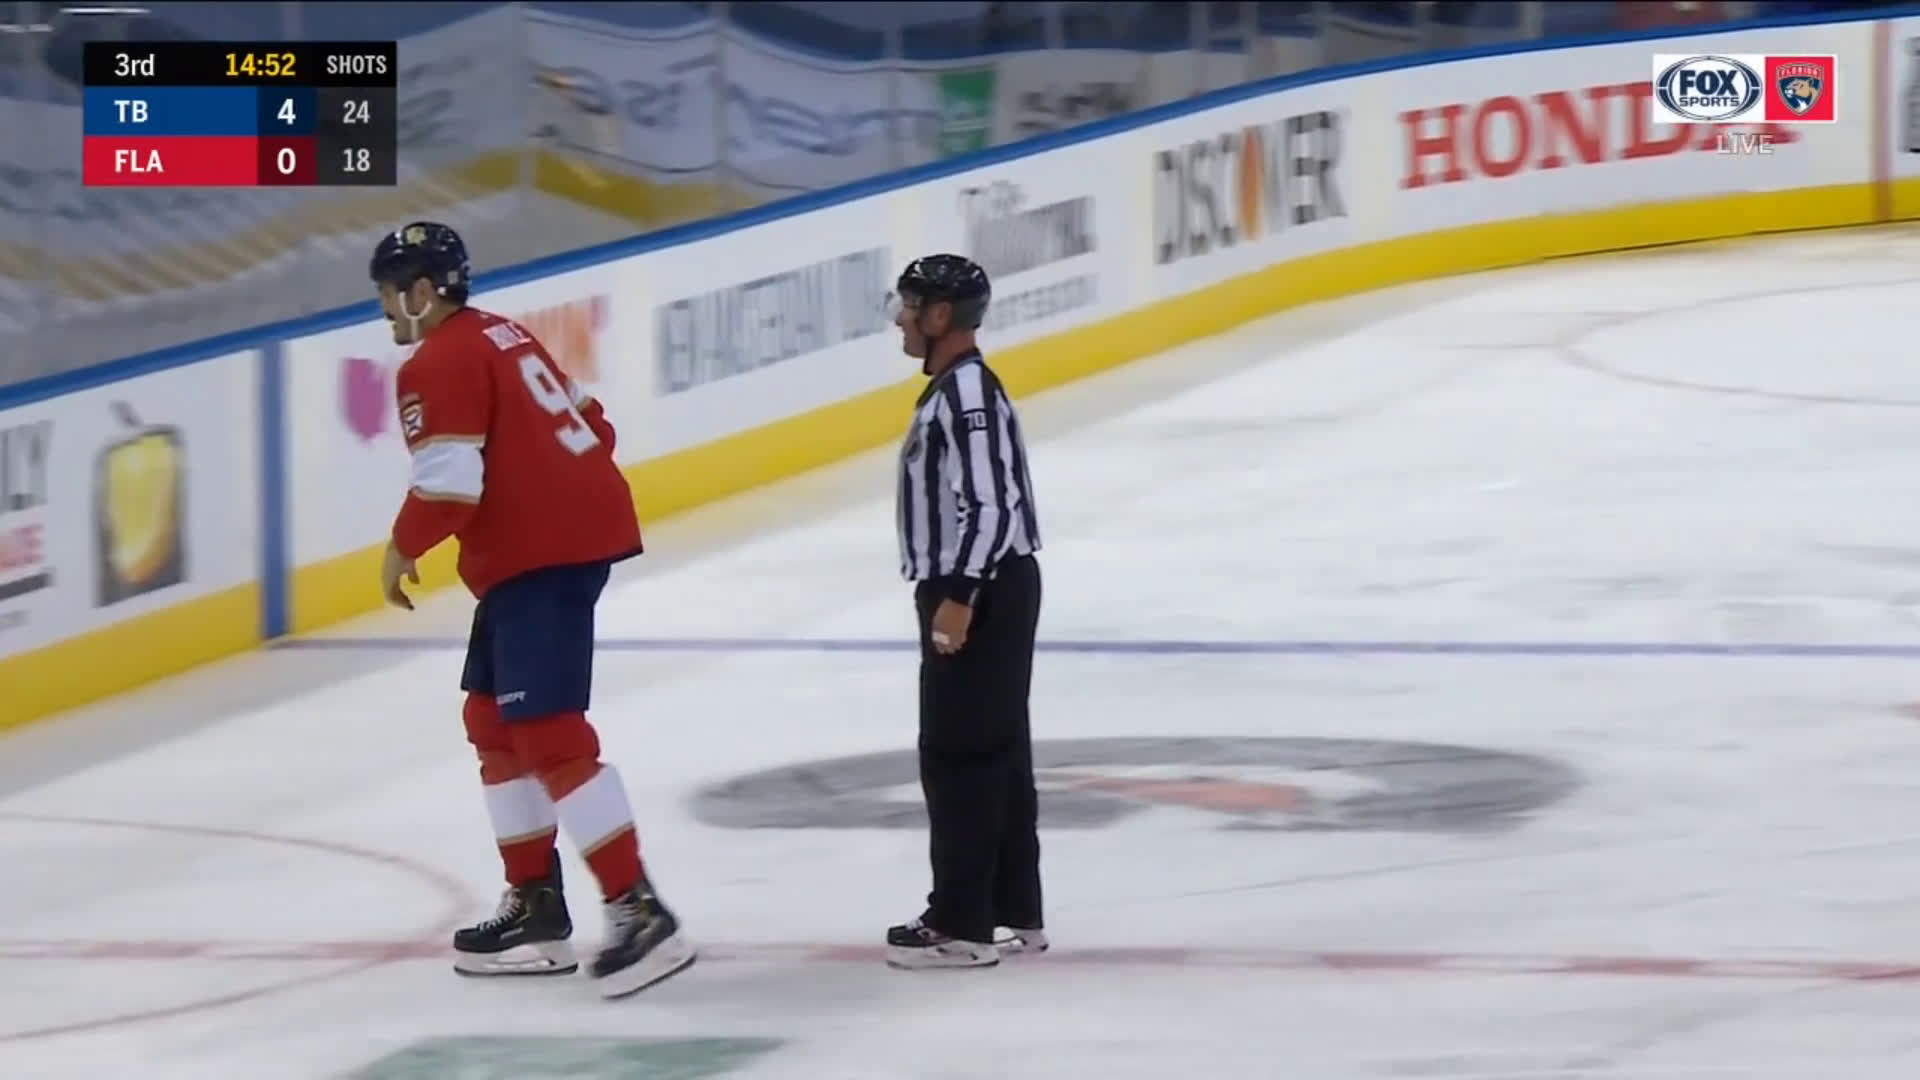 First NHL fight since March